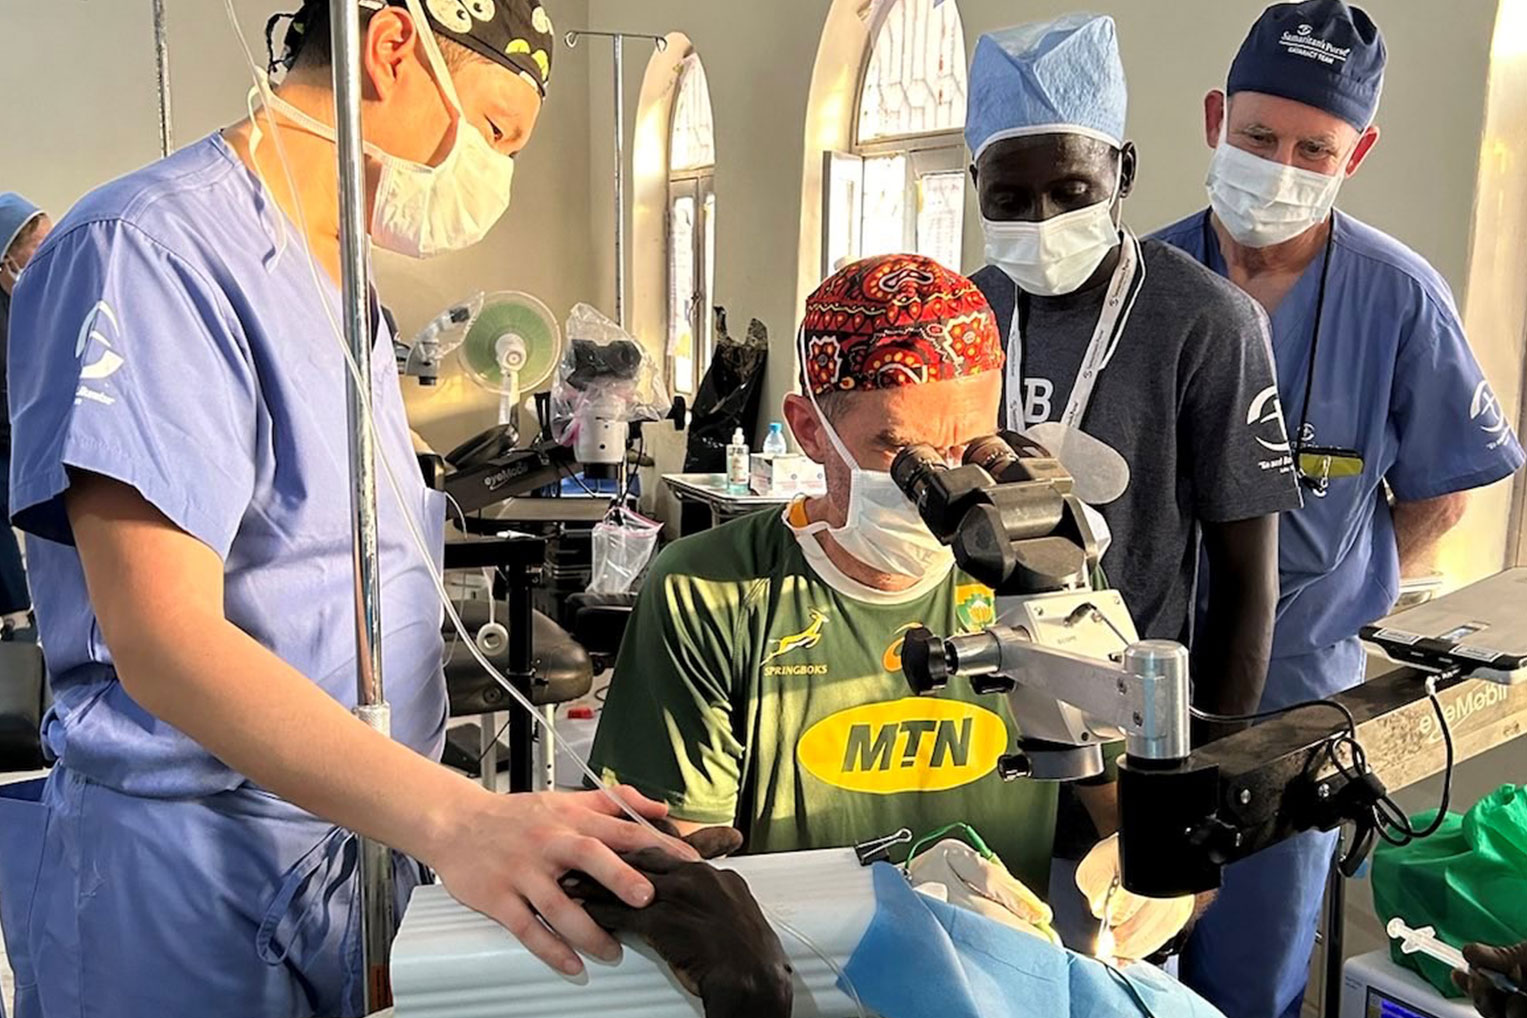 The surgical staff use high-powered optics to remove cataracts.